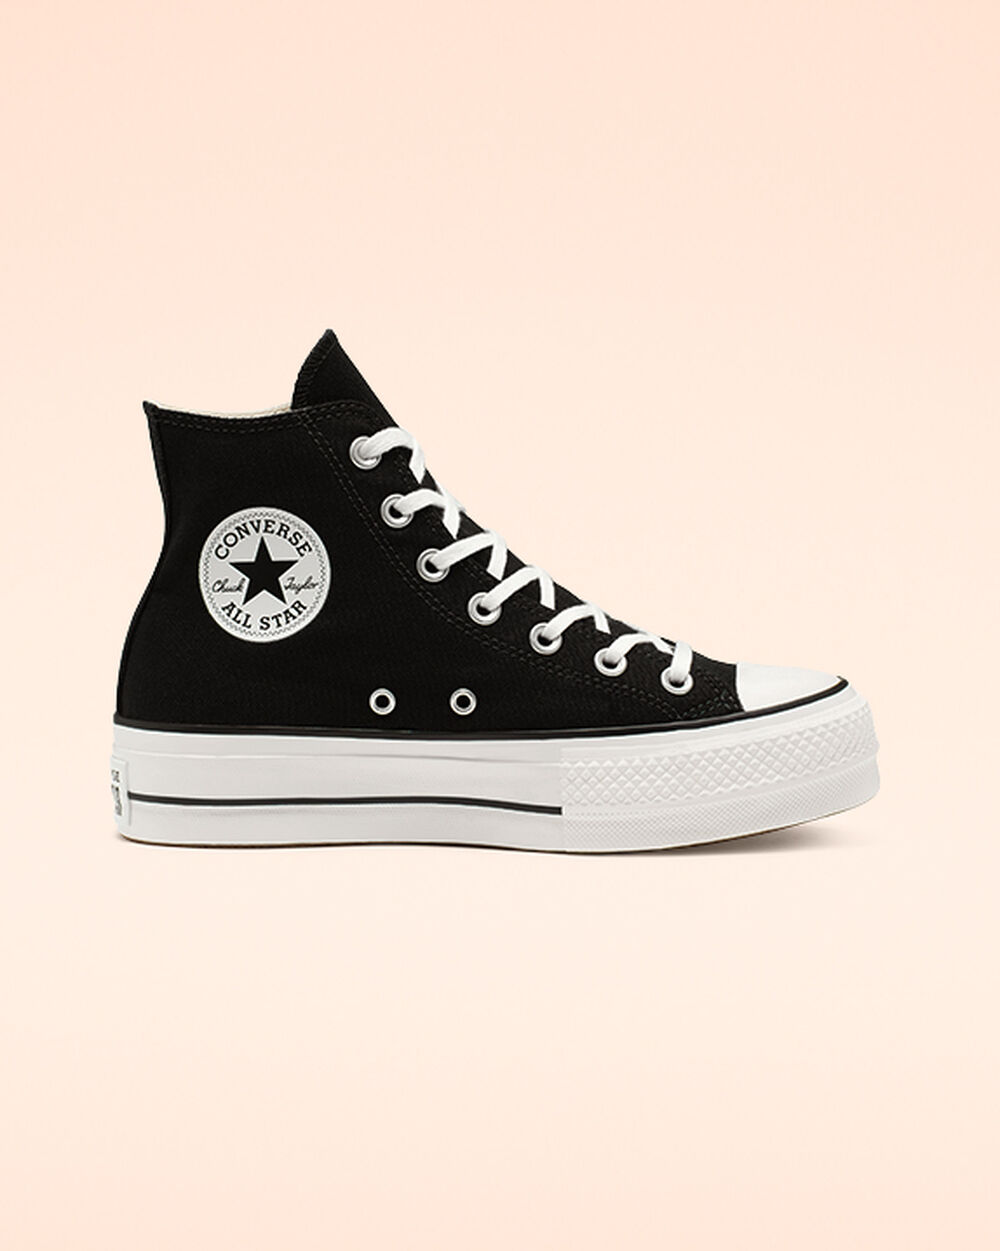 Tenis Converse Chuck Taylor All Star Mujer Negros Blancos | Mexico-213466